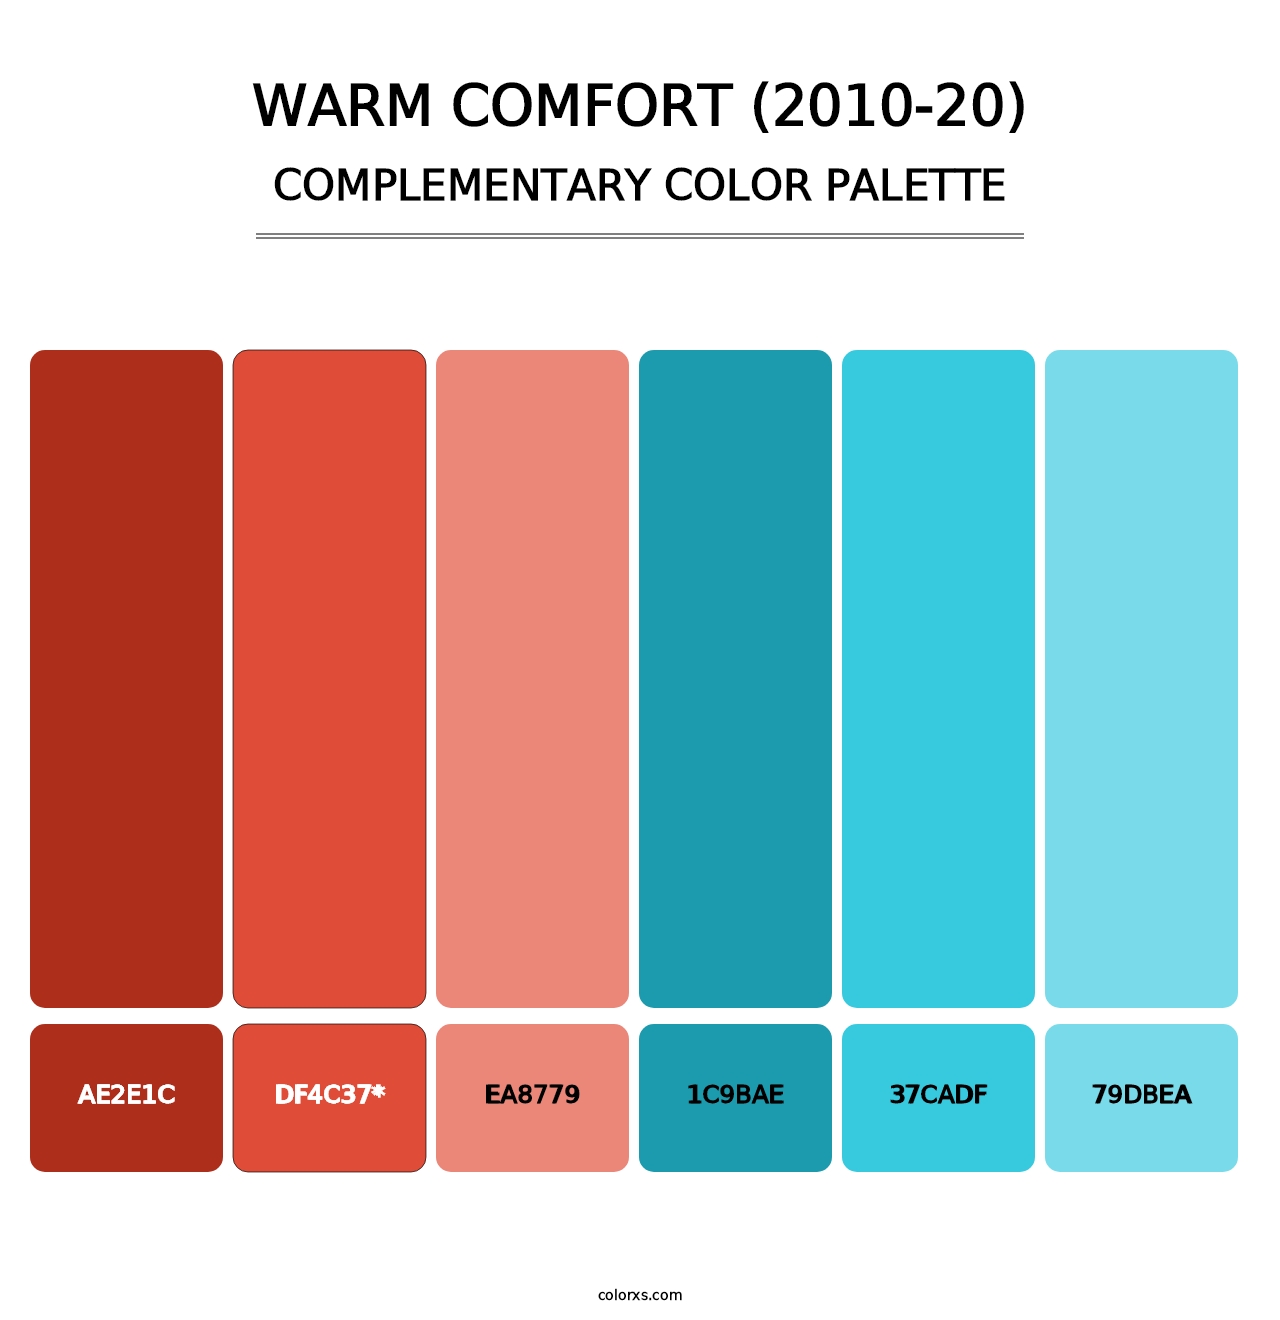 Warm Comfort (2010-20) - Complementary Color Palette